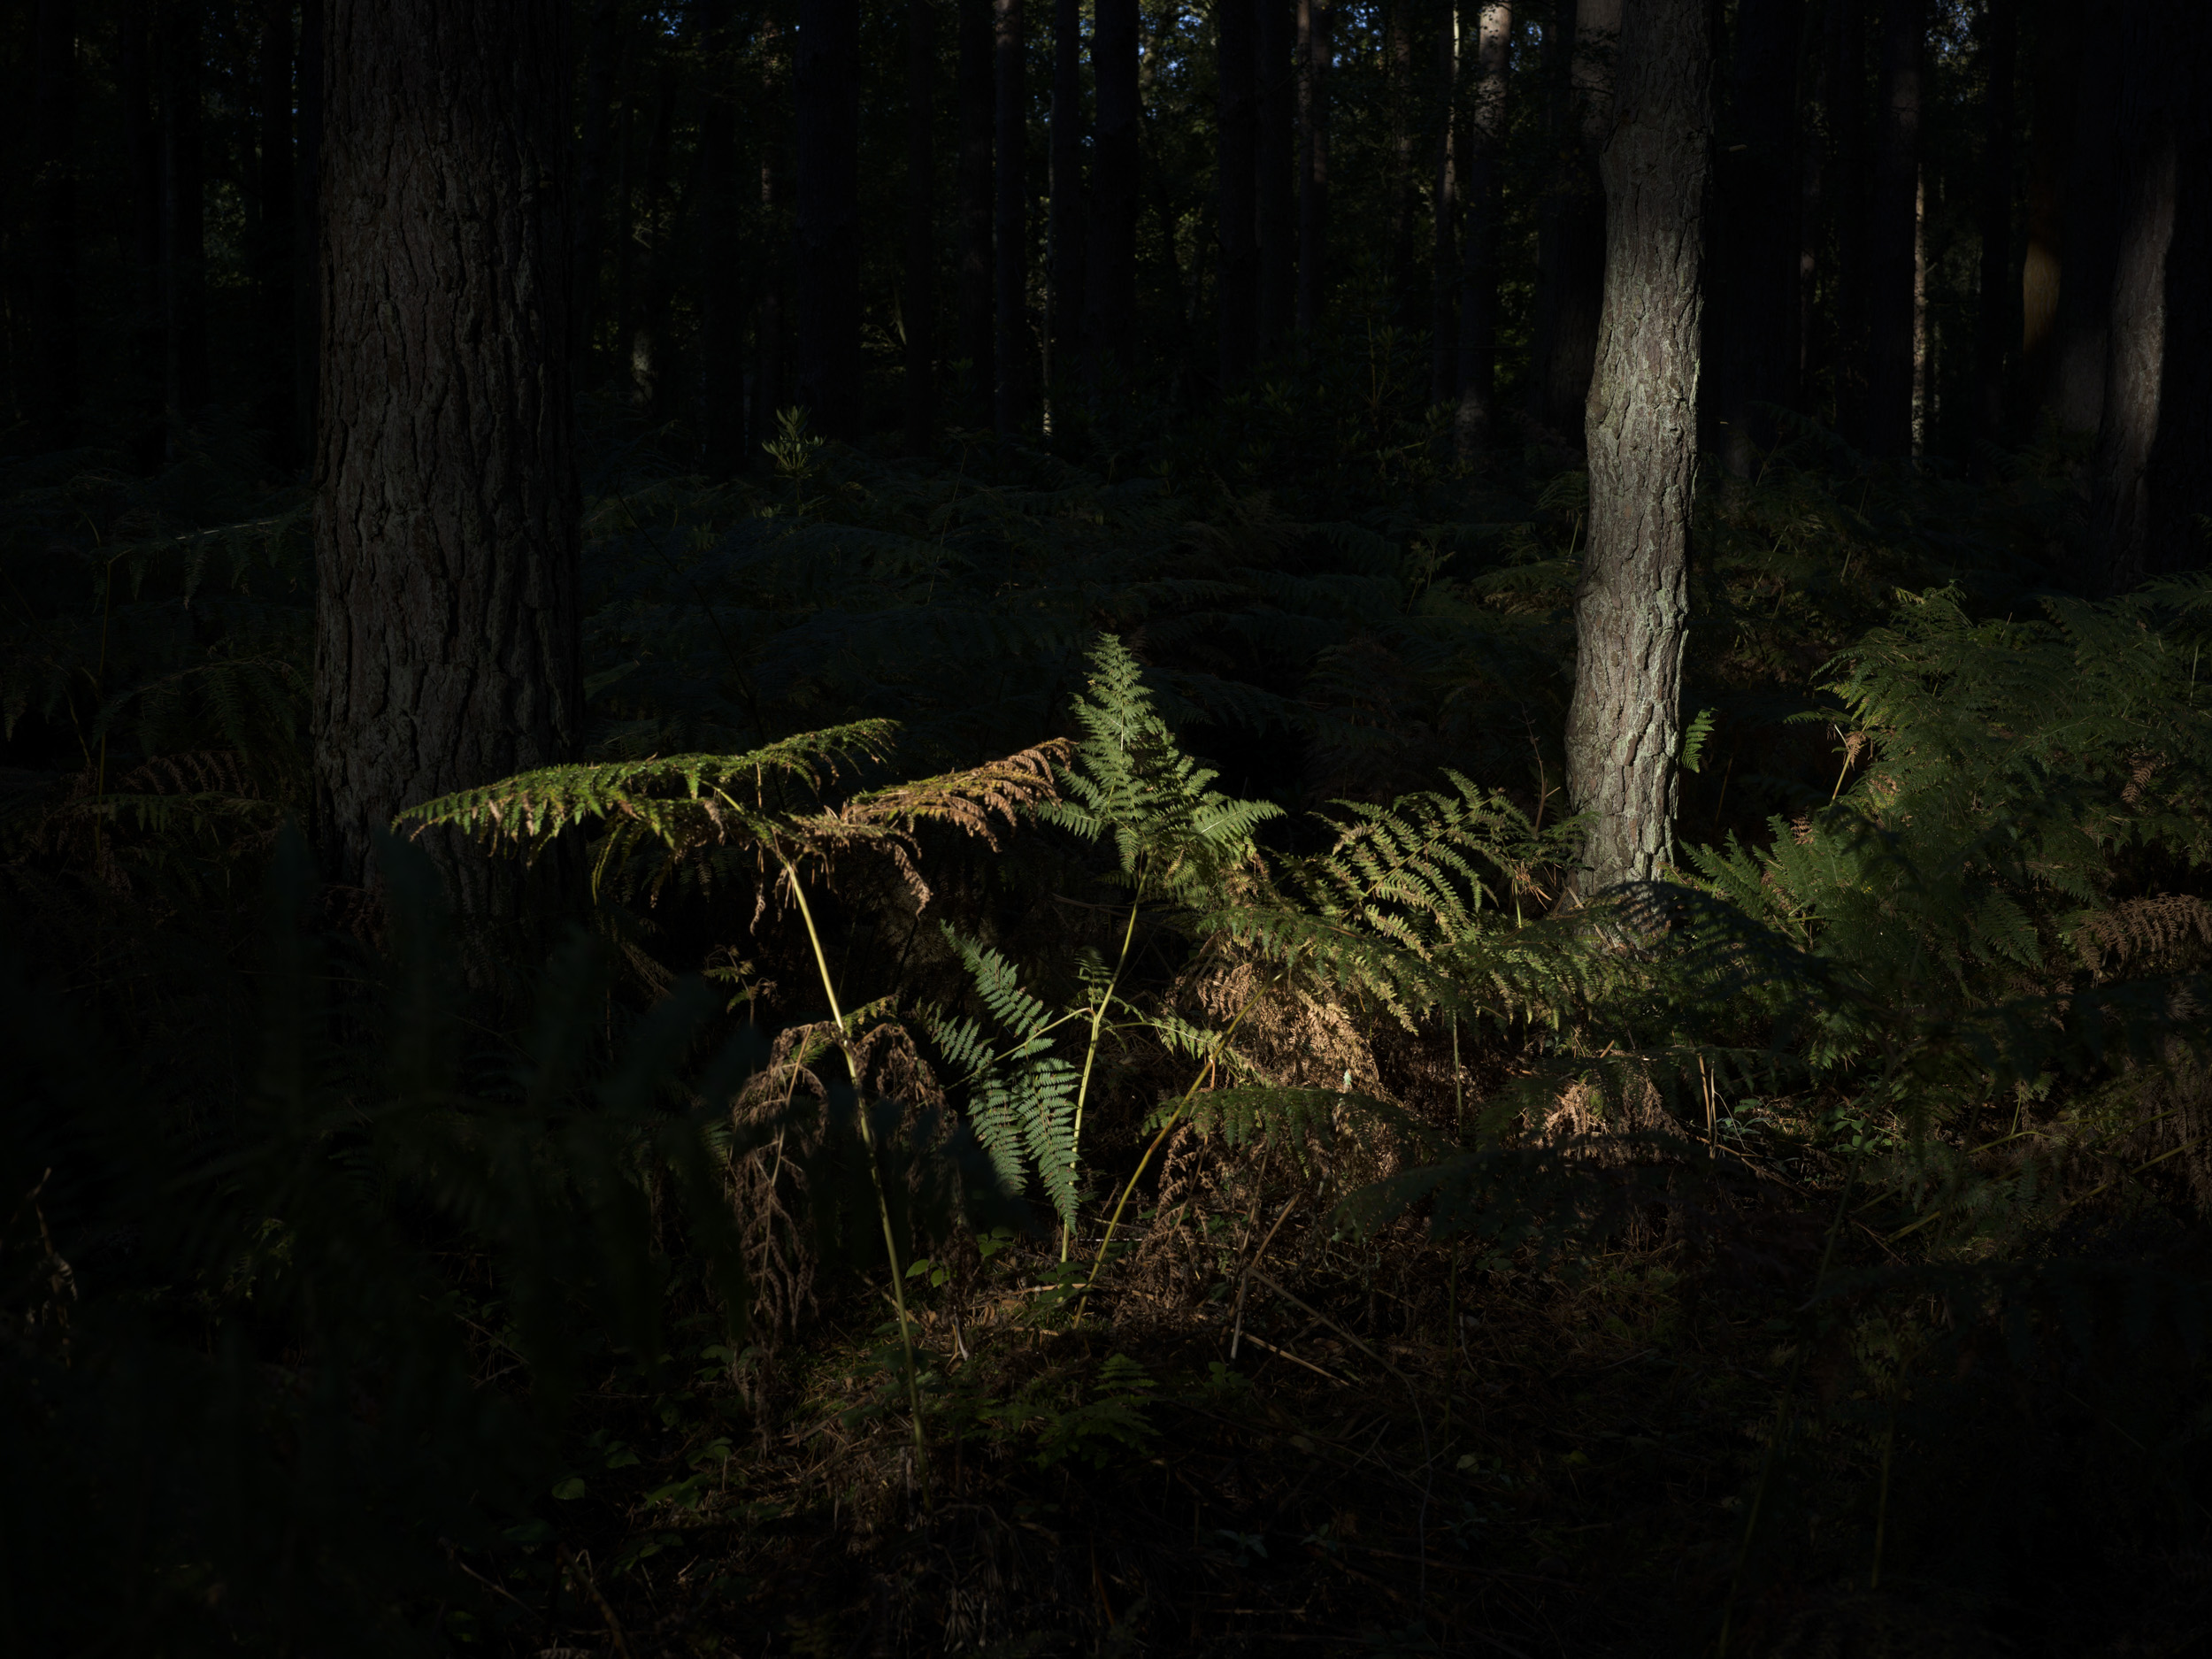 Sample image taken with the Hasselblad X2D 100C of a fern in a shaft of light